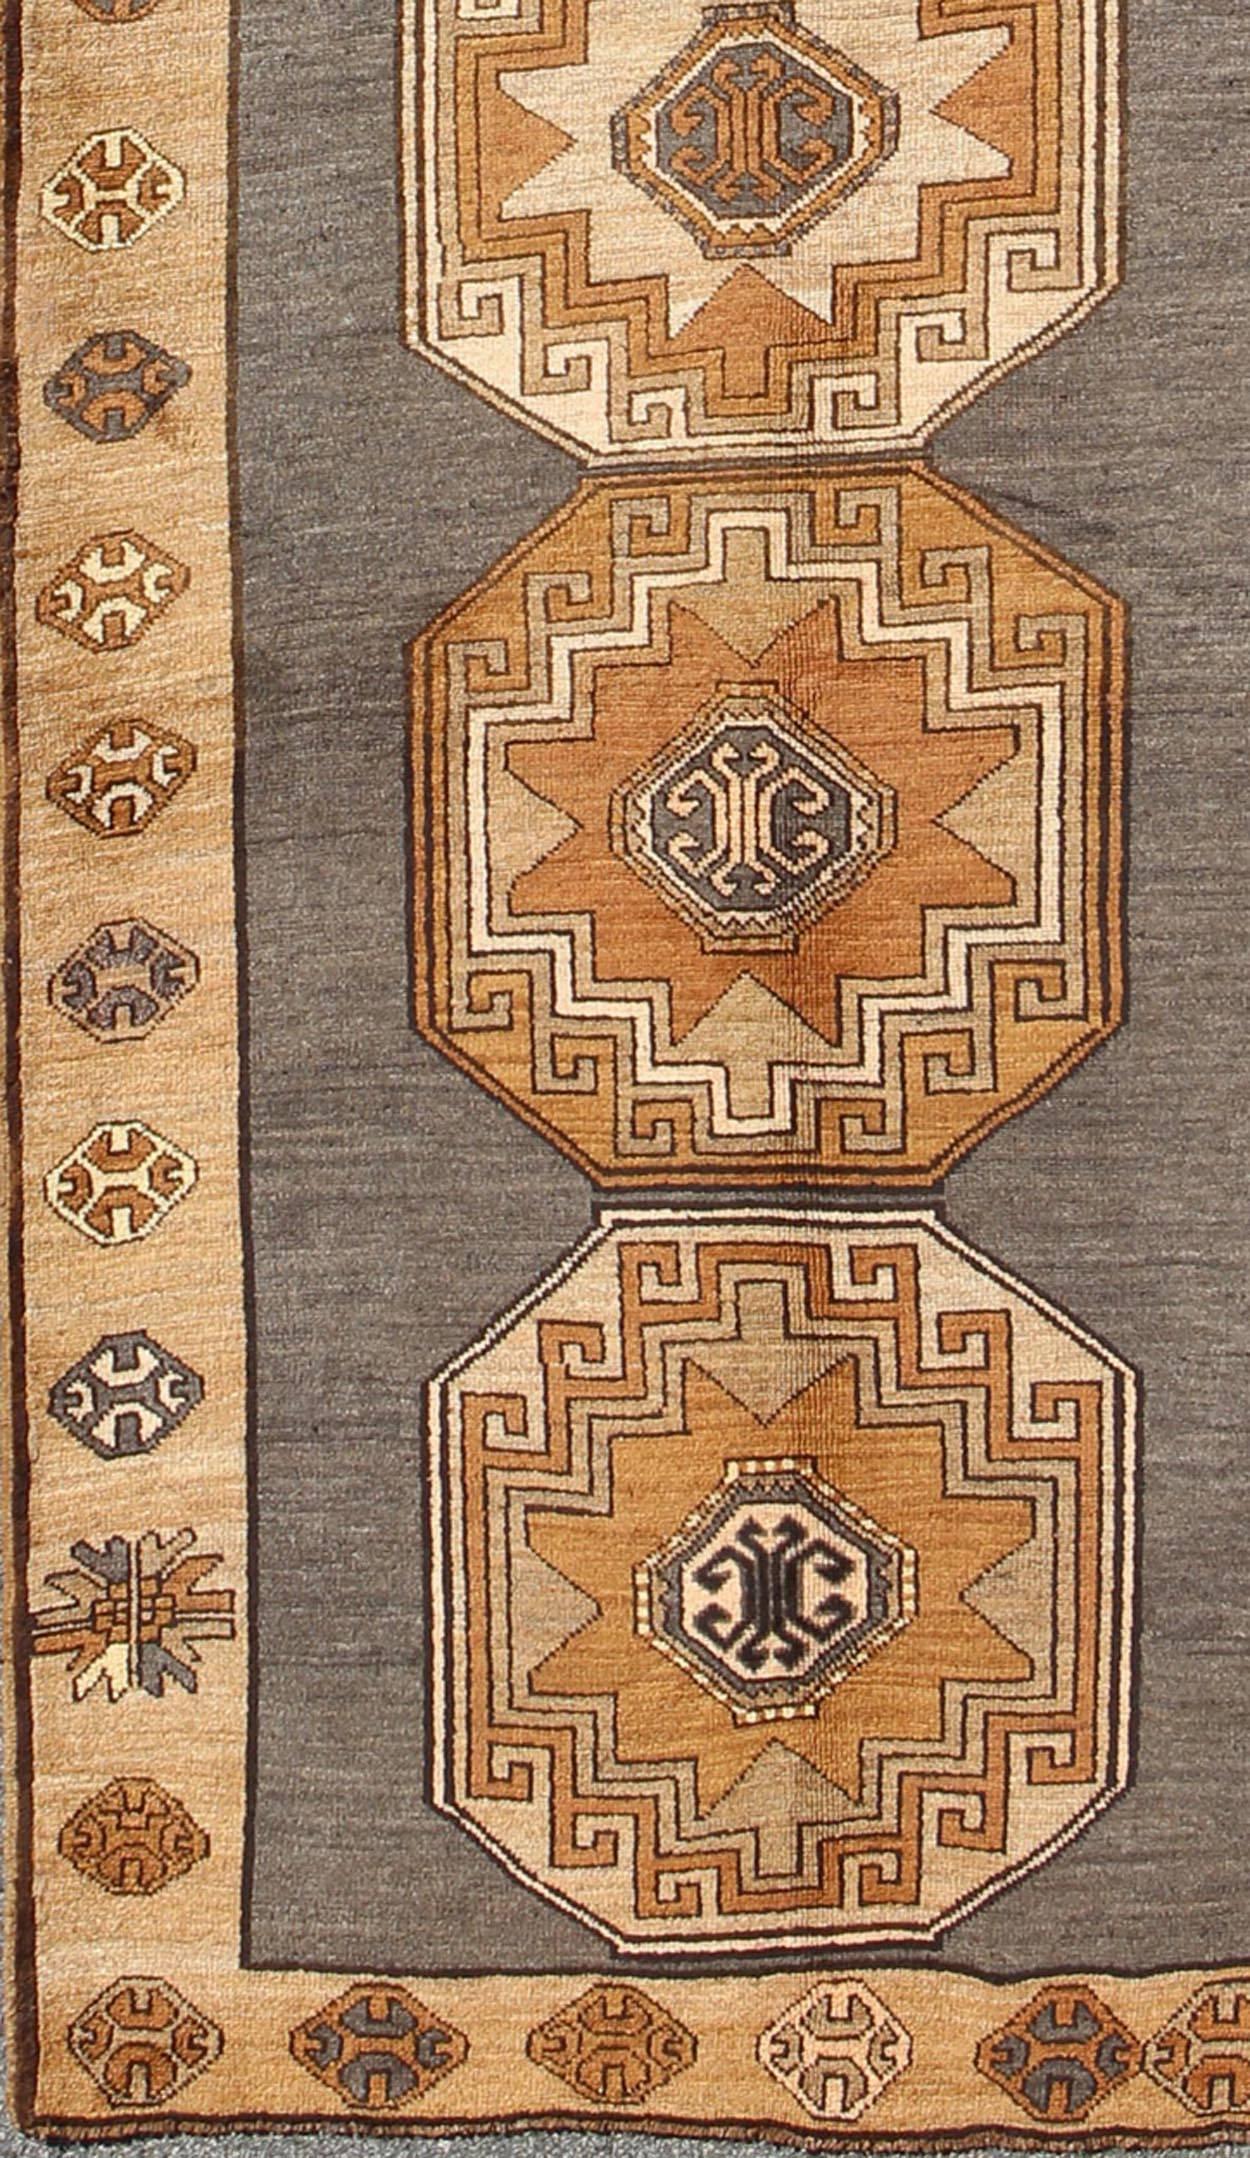 Shades of brown vintage Turkish Oushak runner with vertical medallion design, rug tu-TRS-136085, country of origin / type: Turkey / Oushak, circa 1940

This vintage Turkish Oushak gallery rug, (circa mid-20th century) features a unique blend of